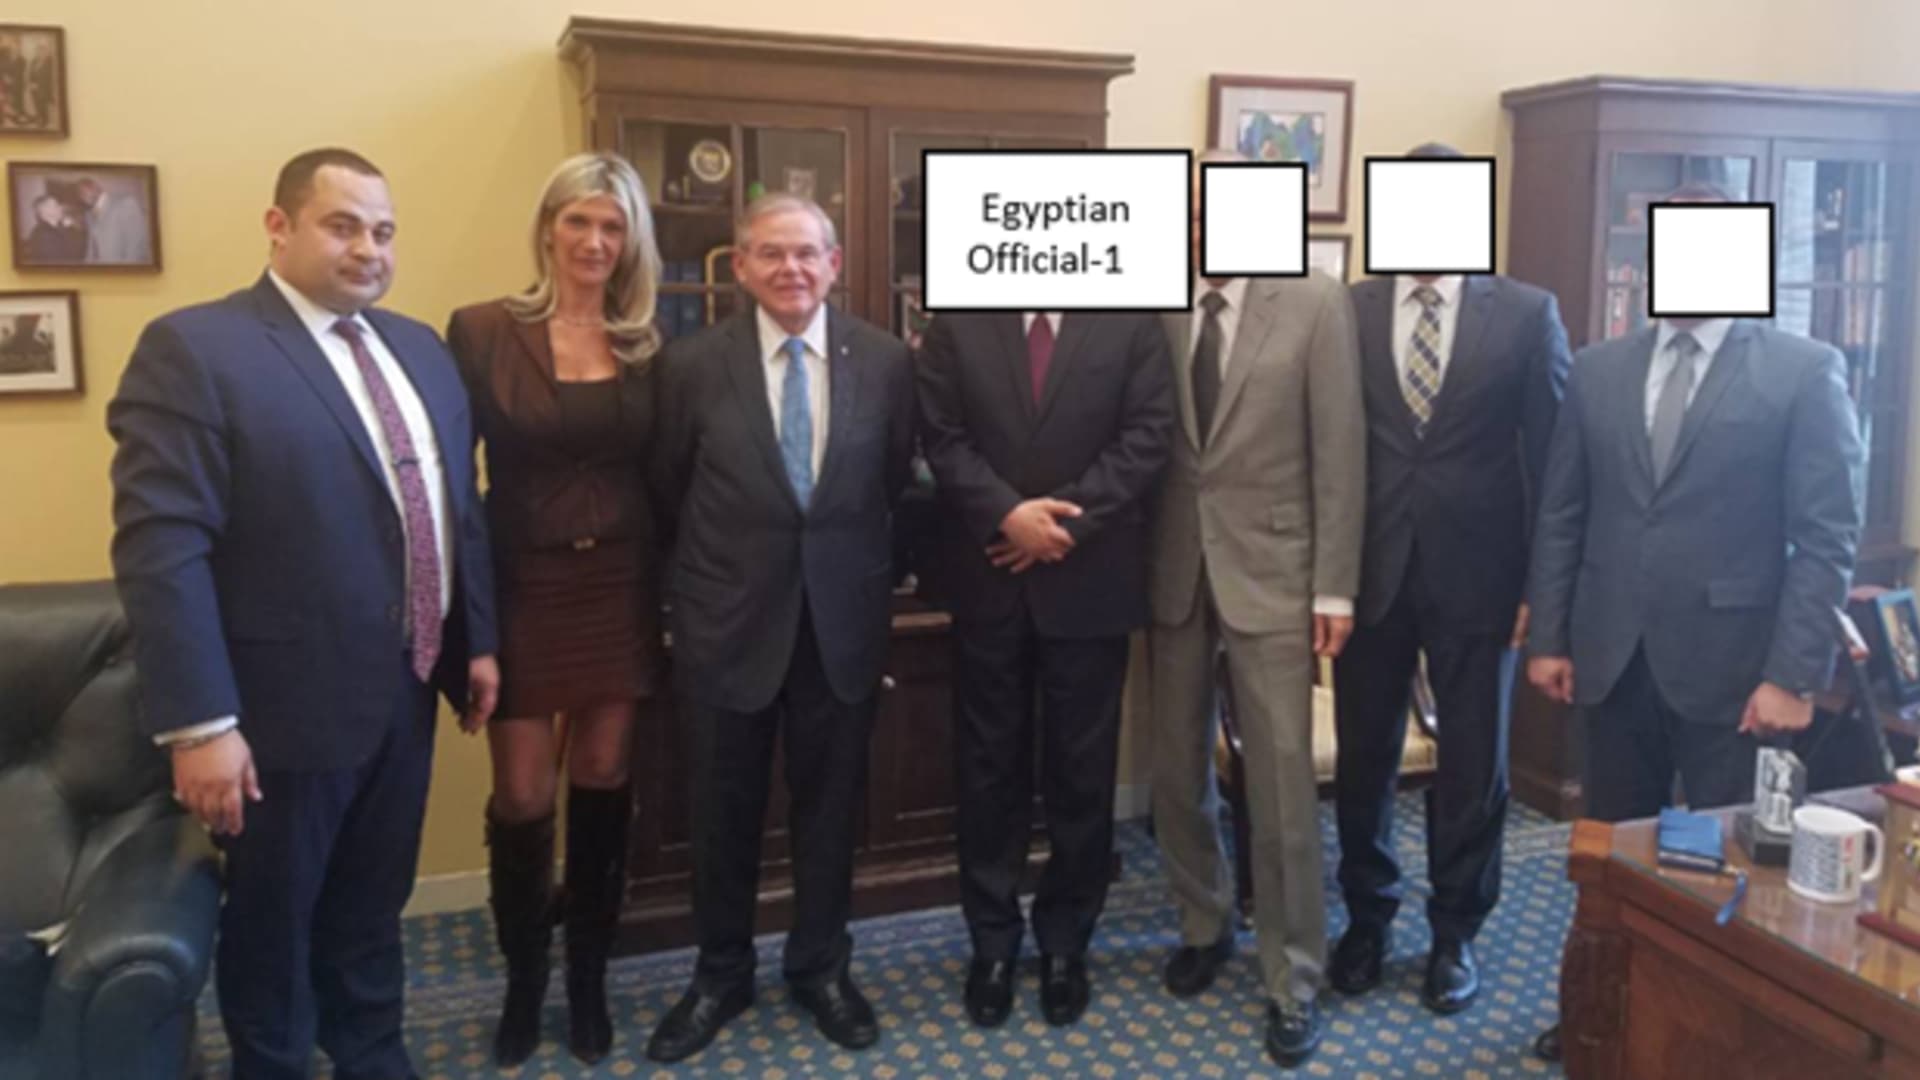 An alleged meeting in Sen. Menendez's office with his wife, Nadine; an Egyptian military official; and other officials where the discussion involved foreign military financing to Egypt, among other topics, an indictment says.